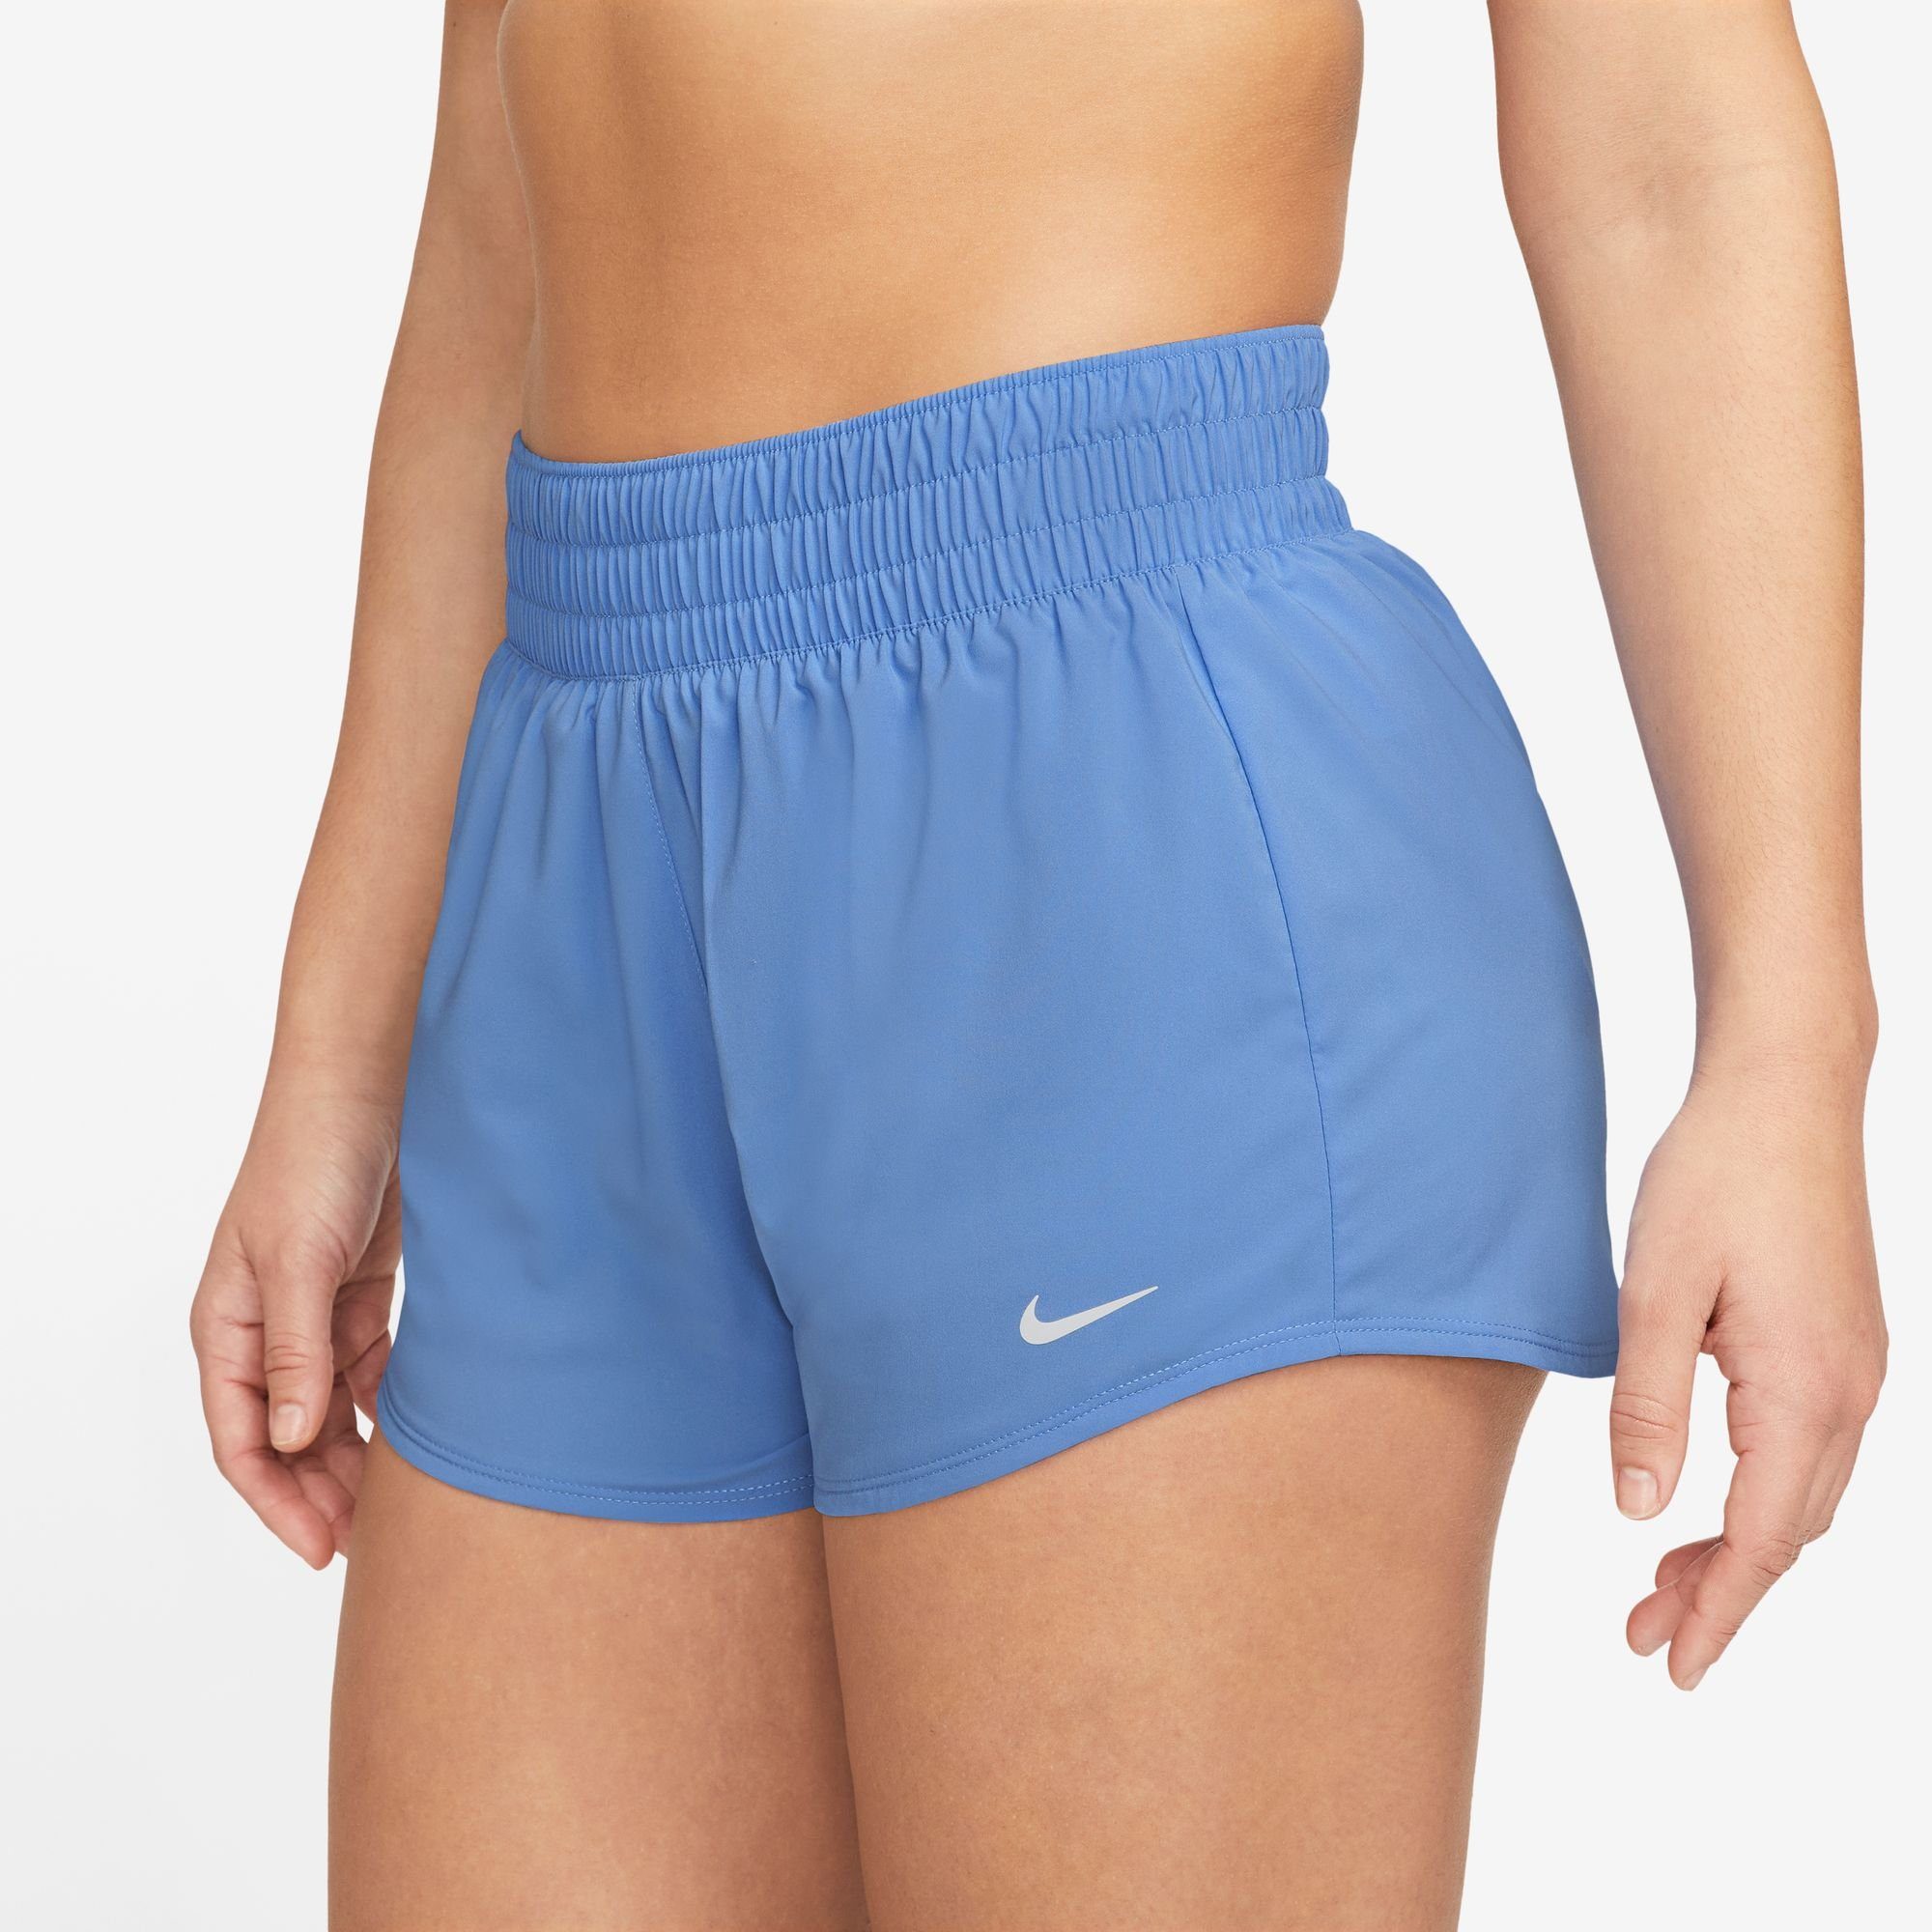 SHORTS BRIEF-LINED WOMEN'S Trainingsshorts SILV MID-RISE ONE POLAR/REFLECTIVE DRI-FIT Nike